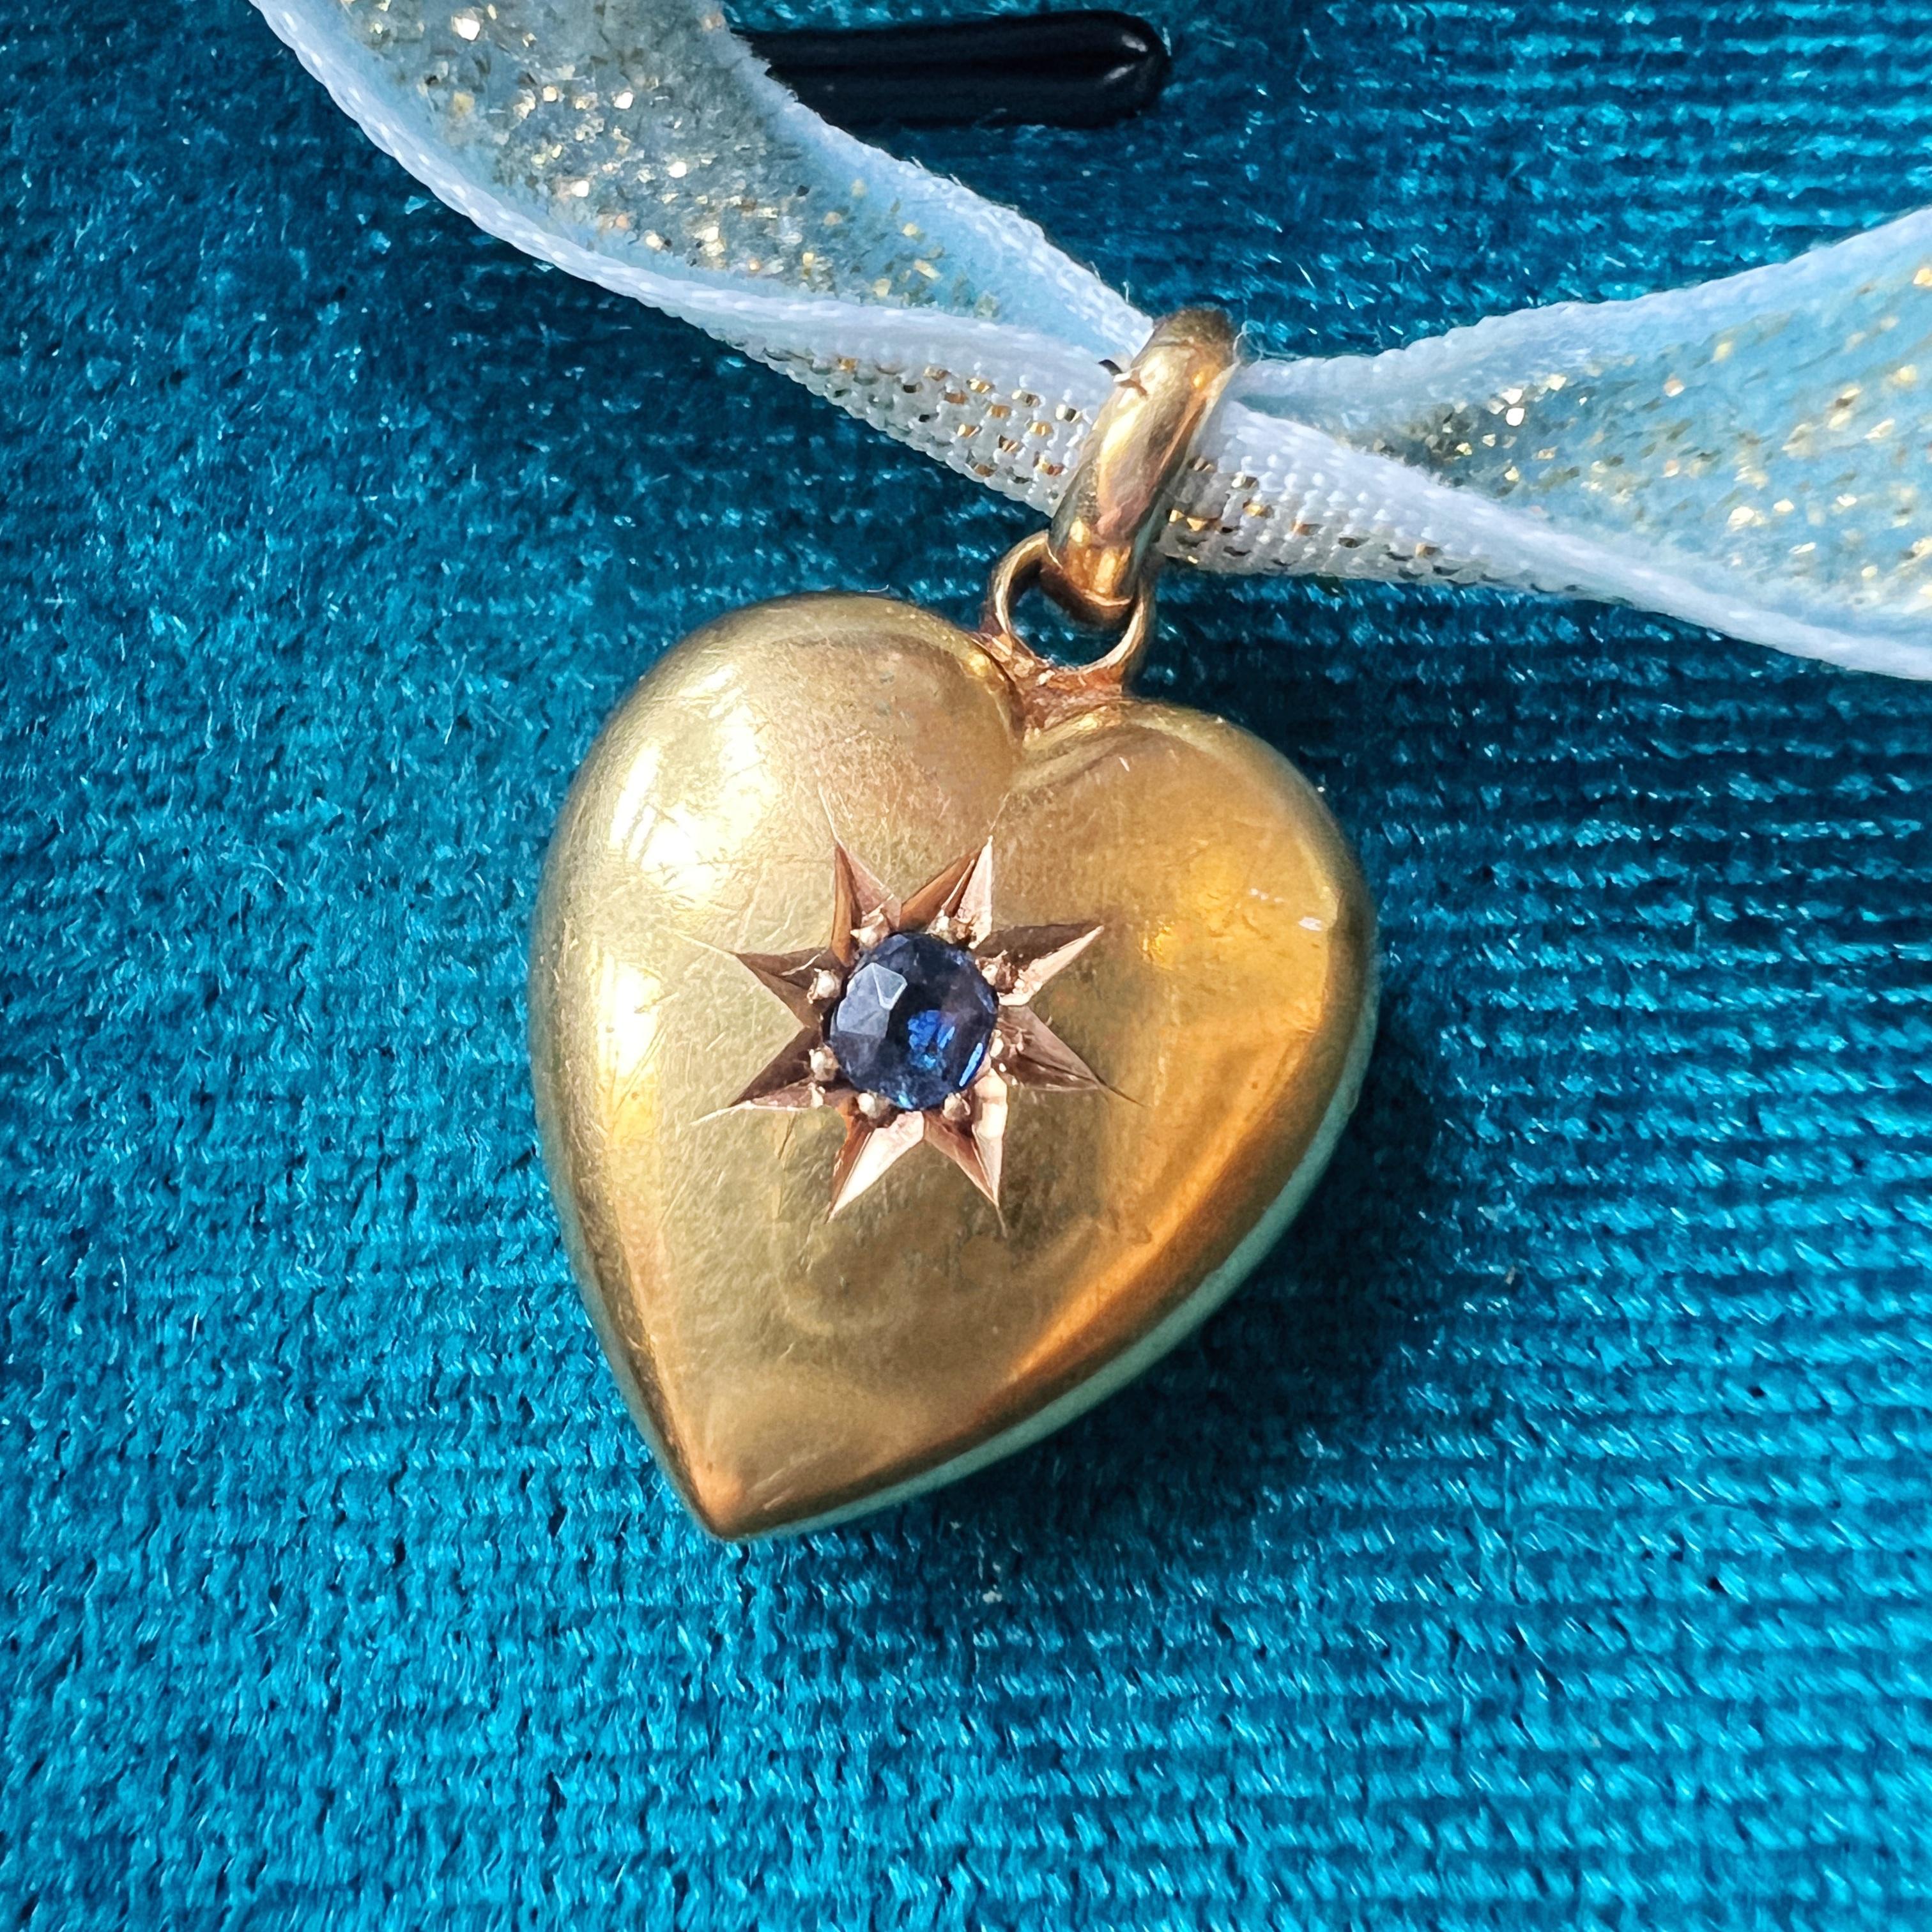 For sale a very sweet 15K gold puffy heart pendant from the Edwardian era.

At the heart of this pendant lies a lustrous blue sapphire star, casting a celestial glow within the warm embrace of buttery 15K gold.

The heart, a perennial symbol of